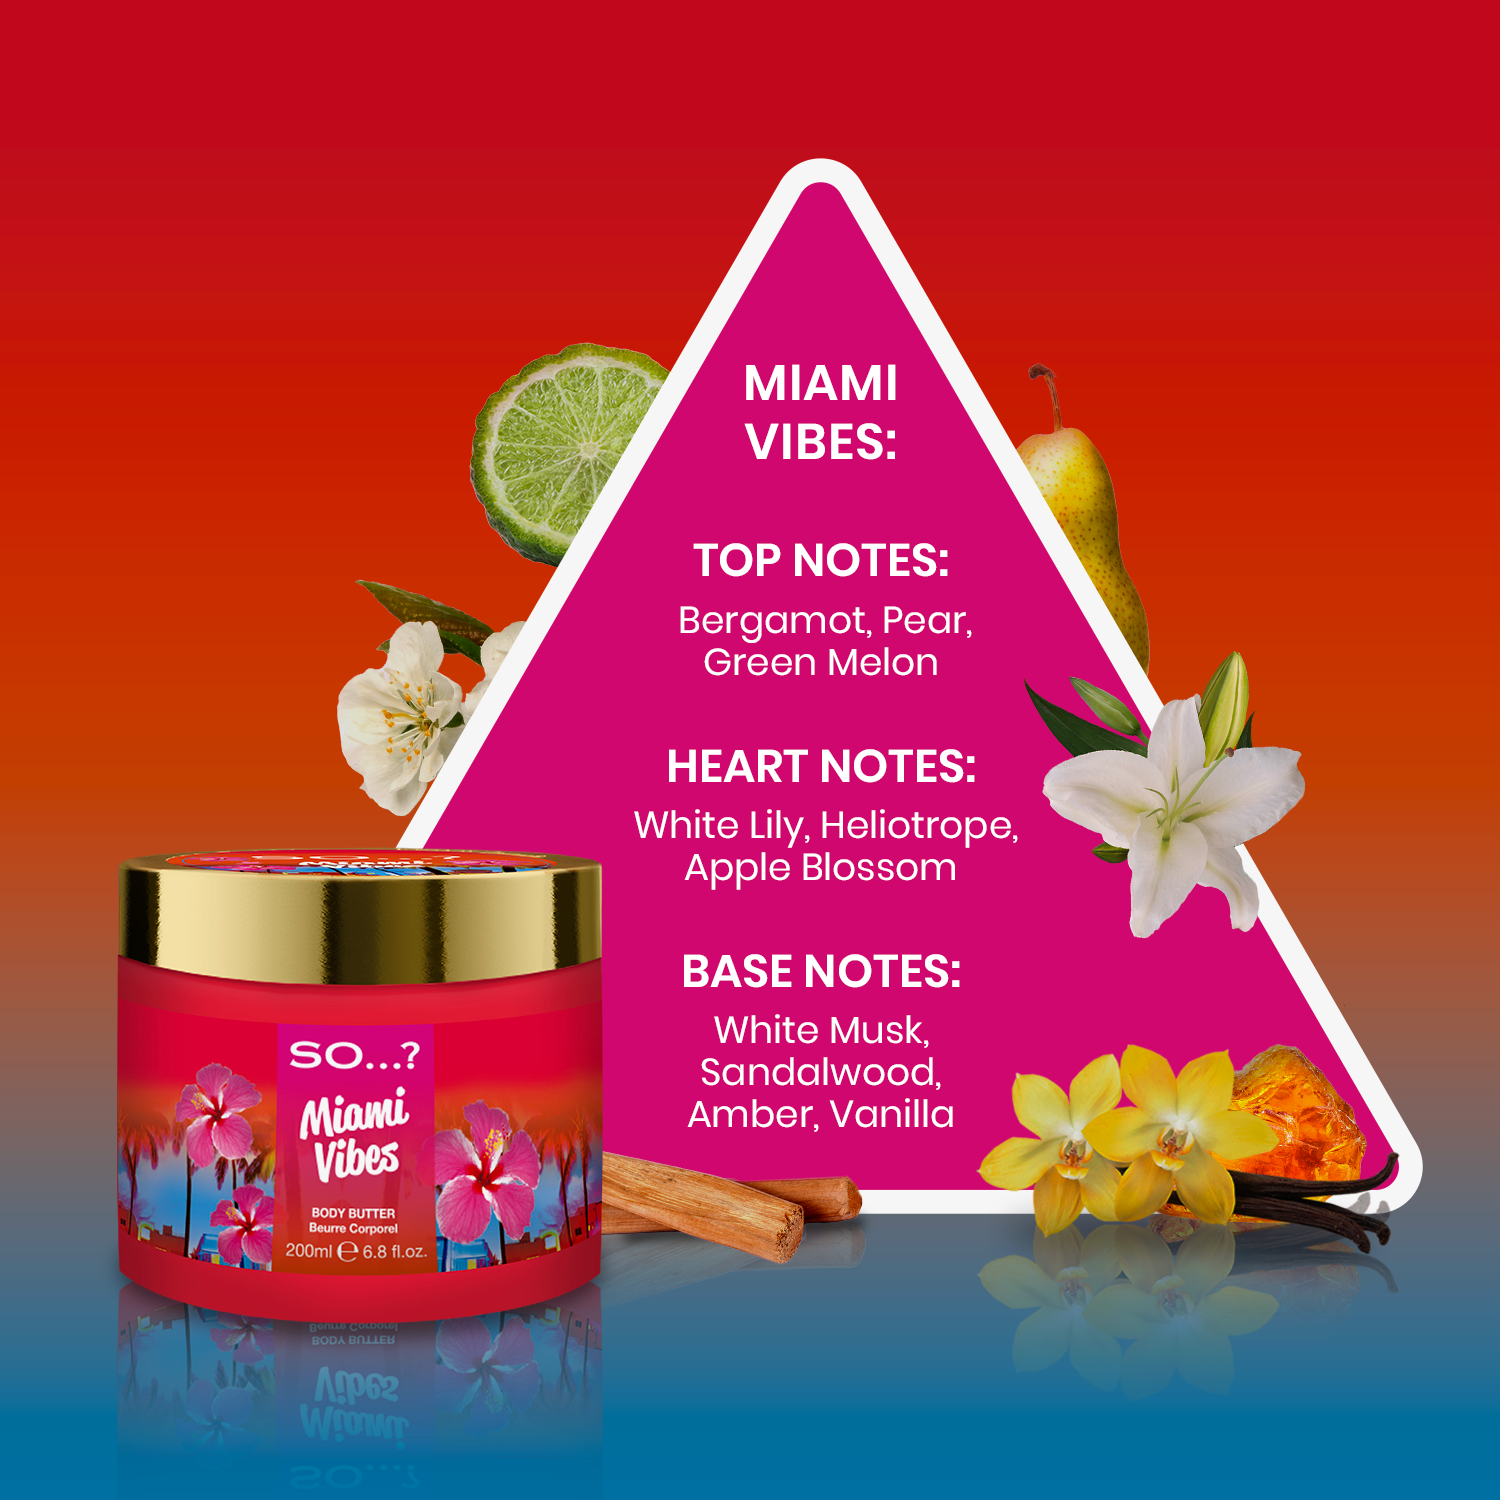 So...? Miami Vibes body butter 200ml